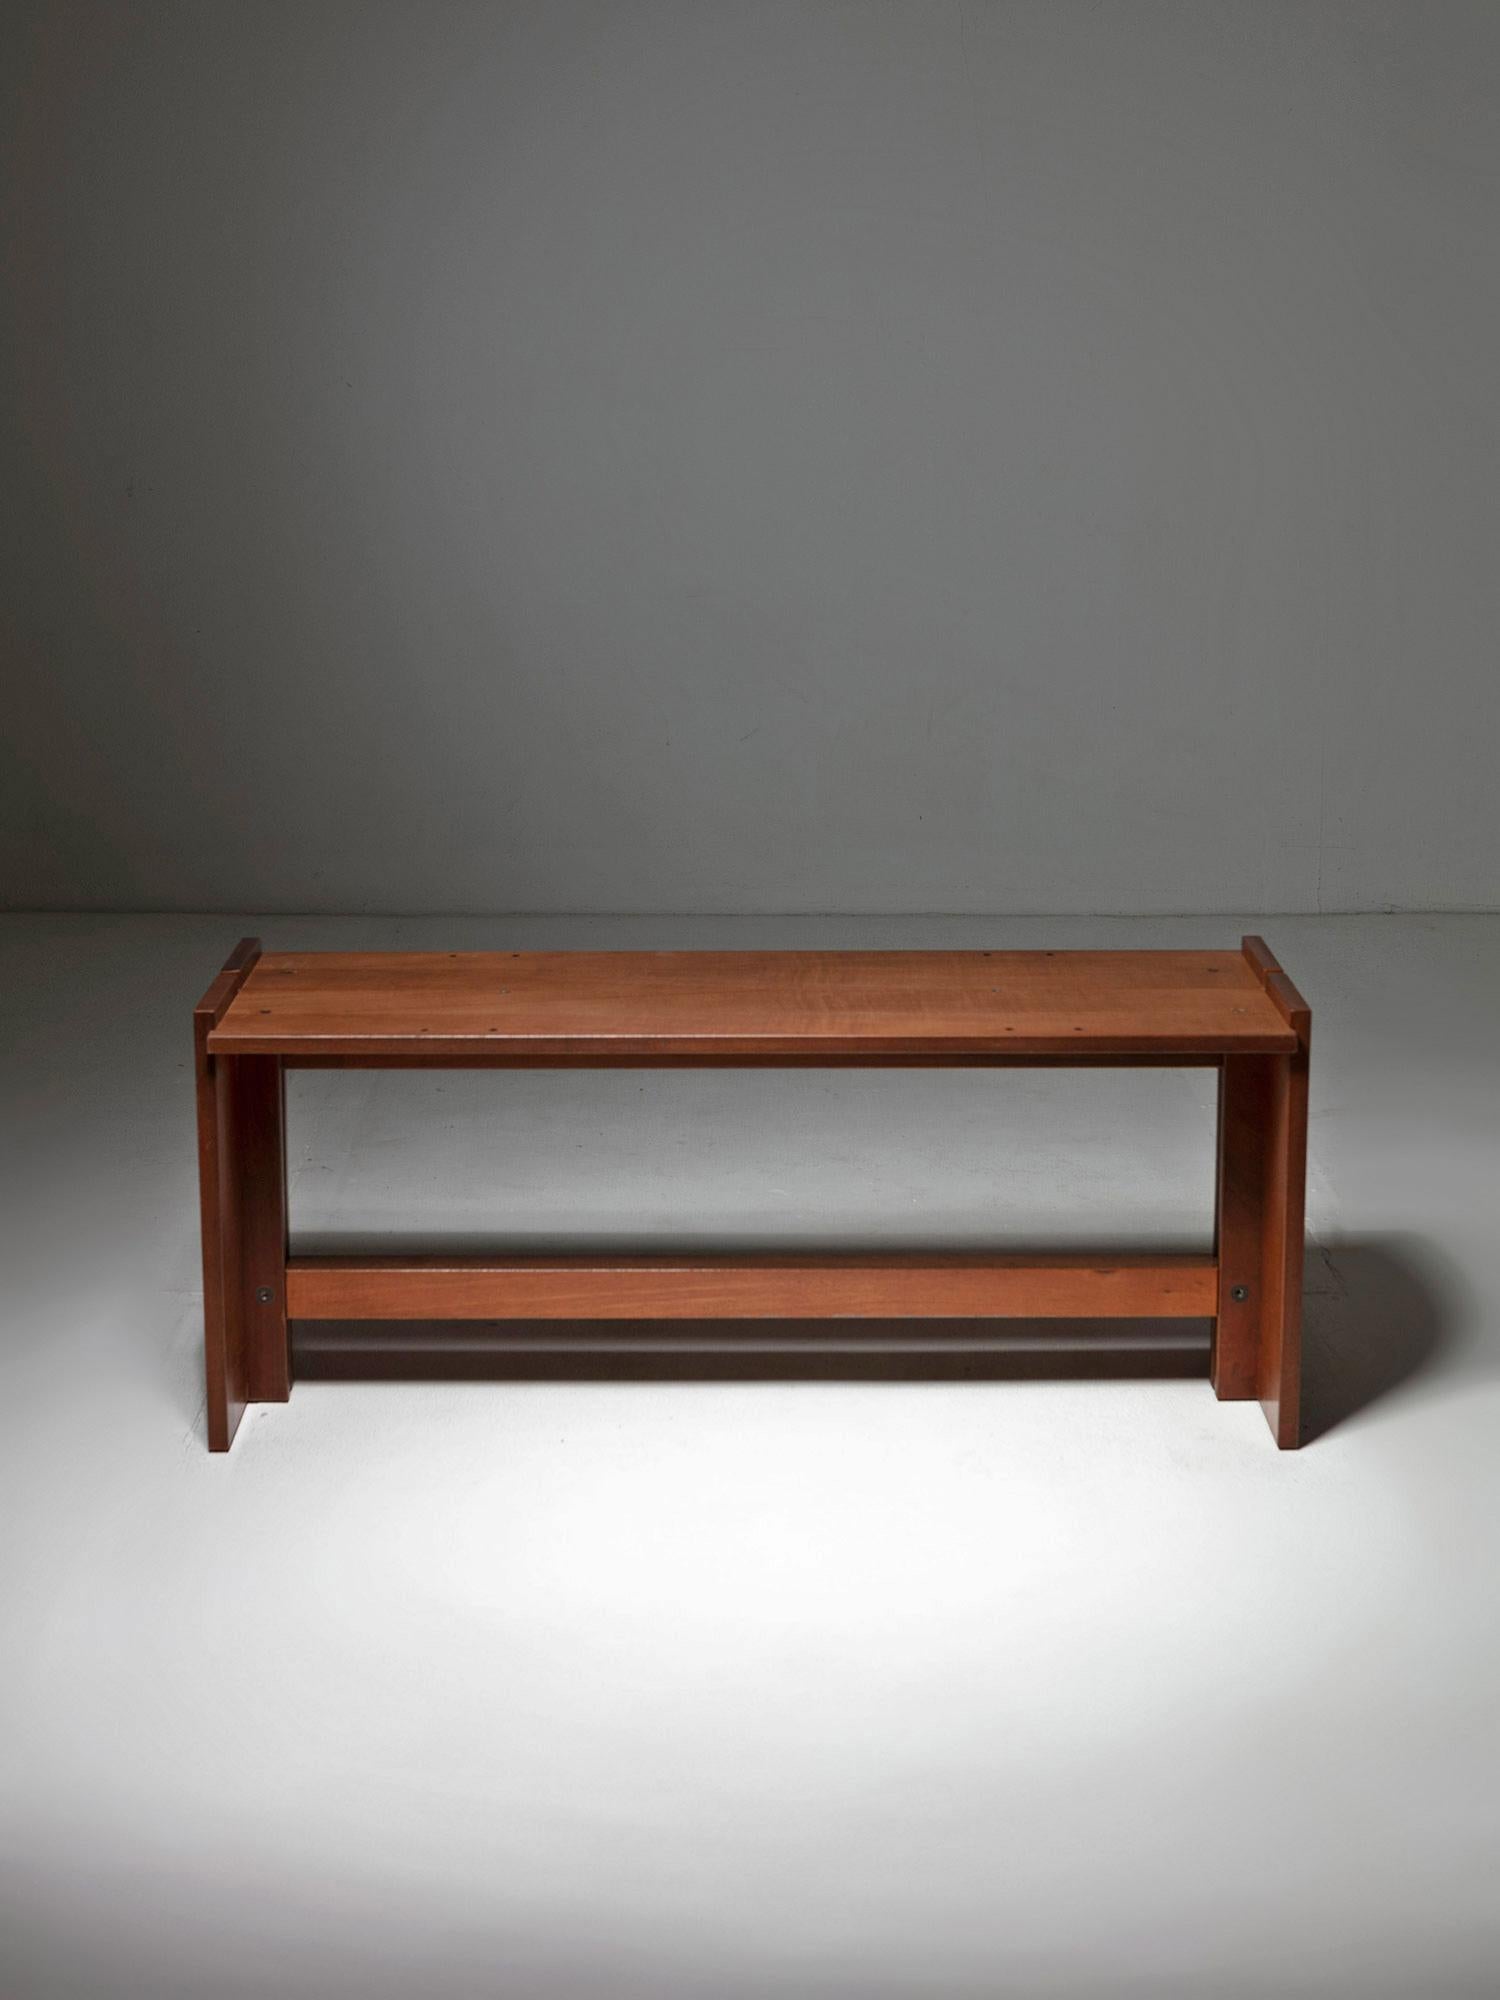 Late 20th Century Walnut and Leather Bench Model 662 by A. Vigilio for Bernini, Italy, 1980s For Sale